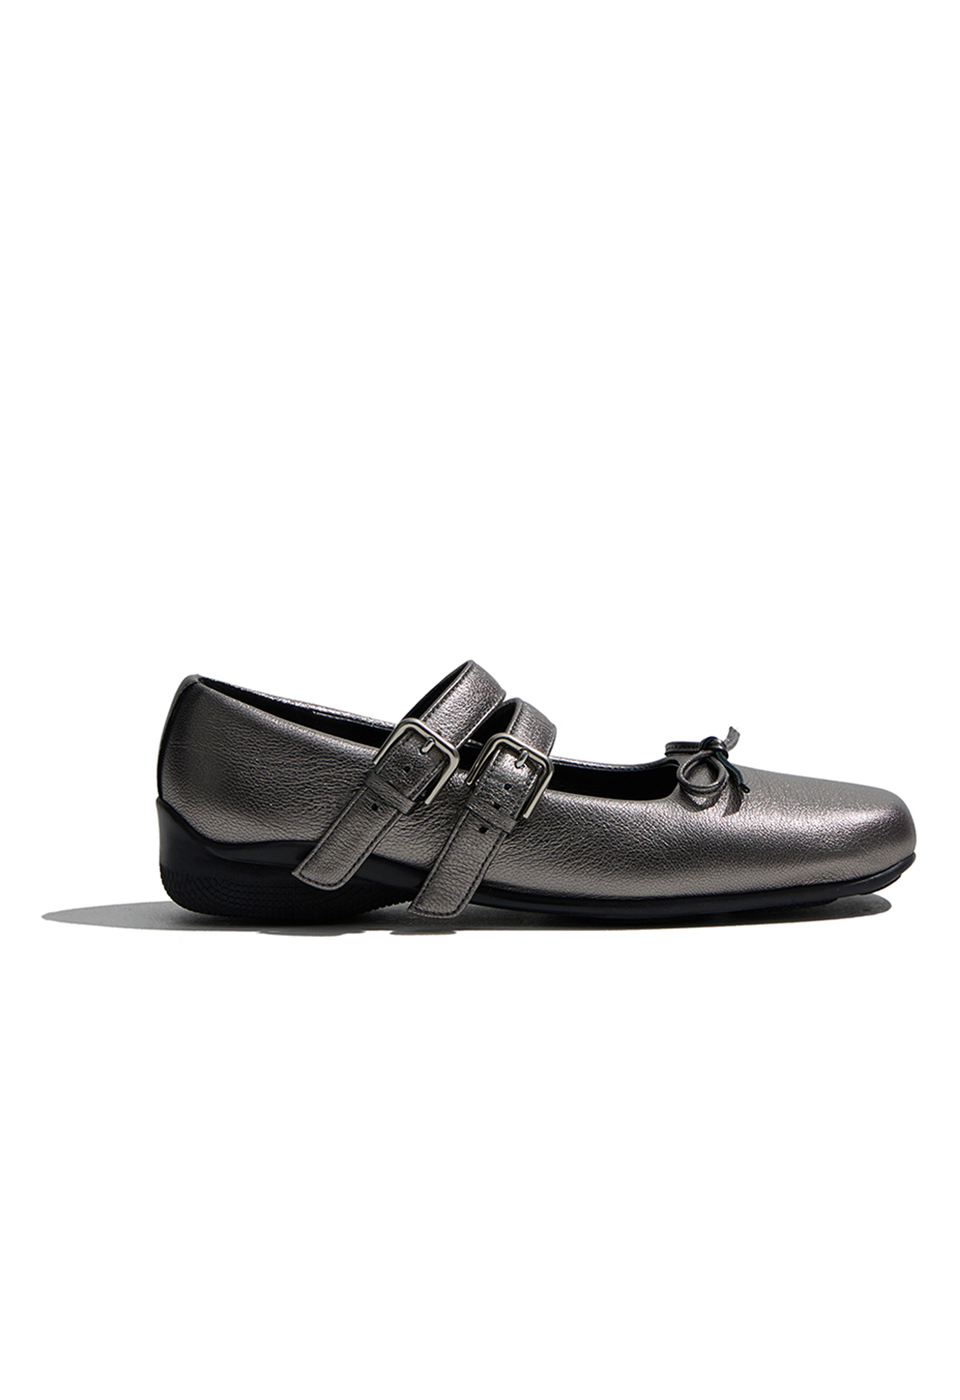 PADDED BUCKLE BALLET FLATS, CHARCOAL